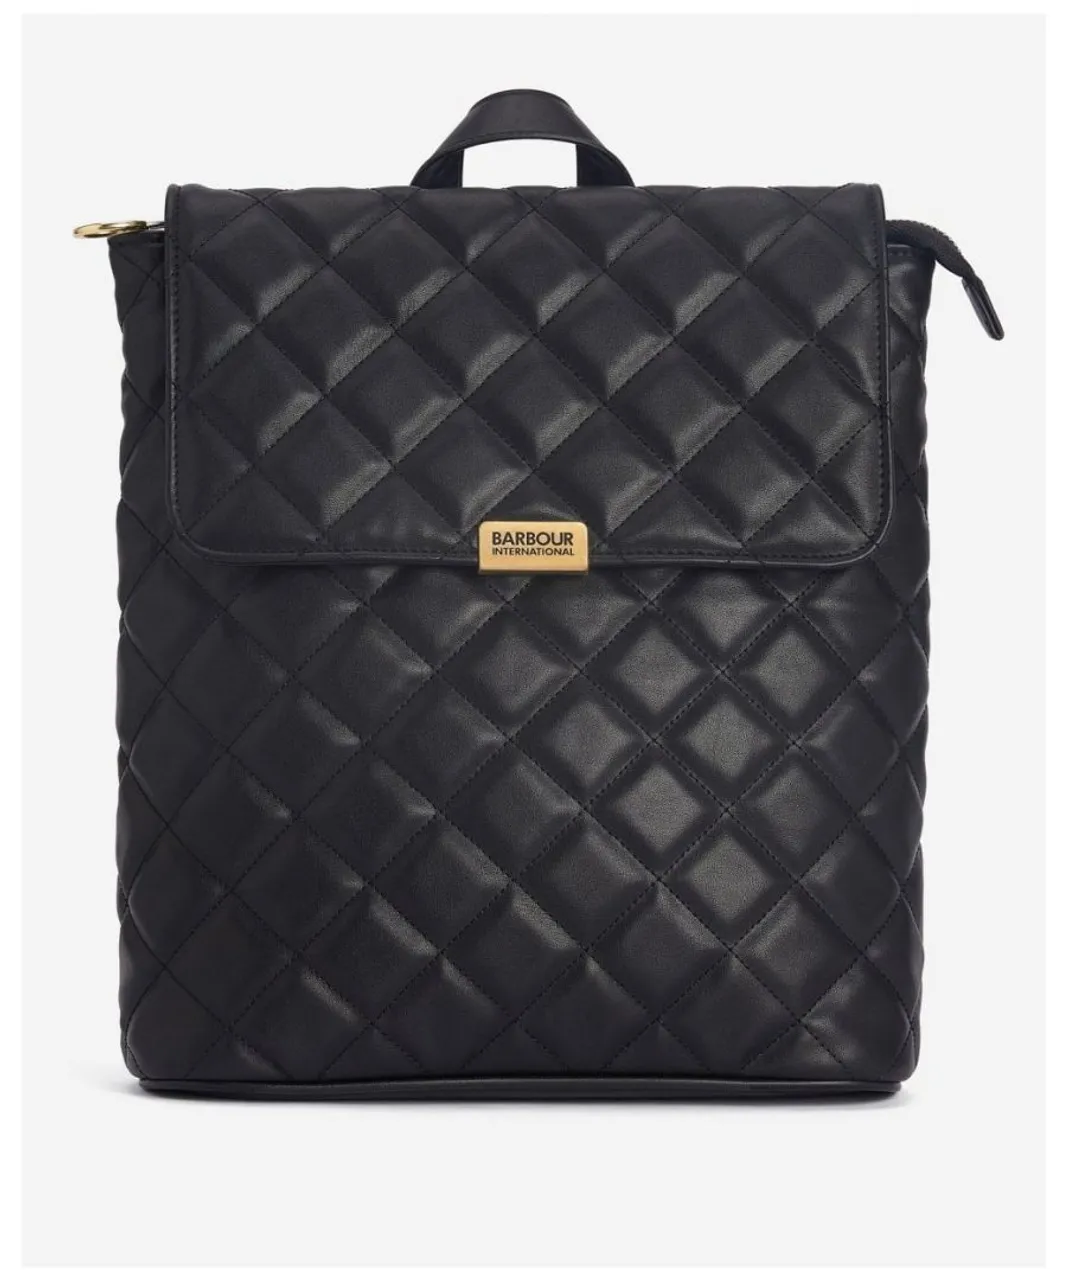 Barbour International Quilted Hoxton Womens Backpack - Black - One Size